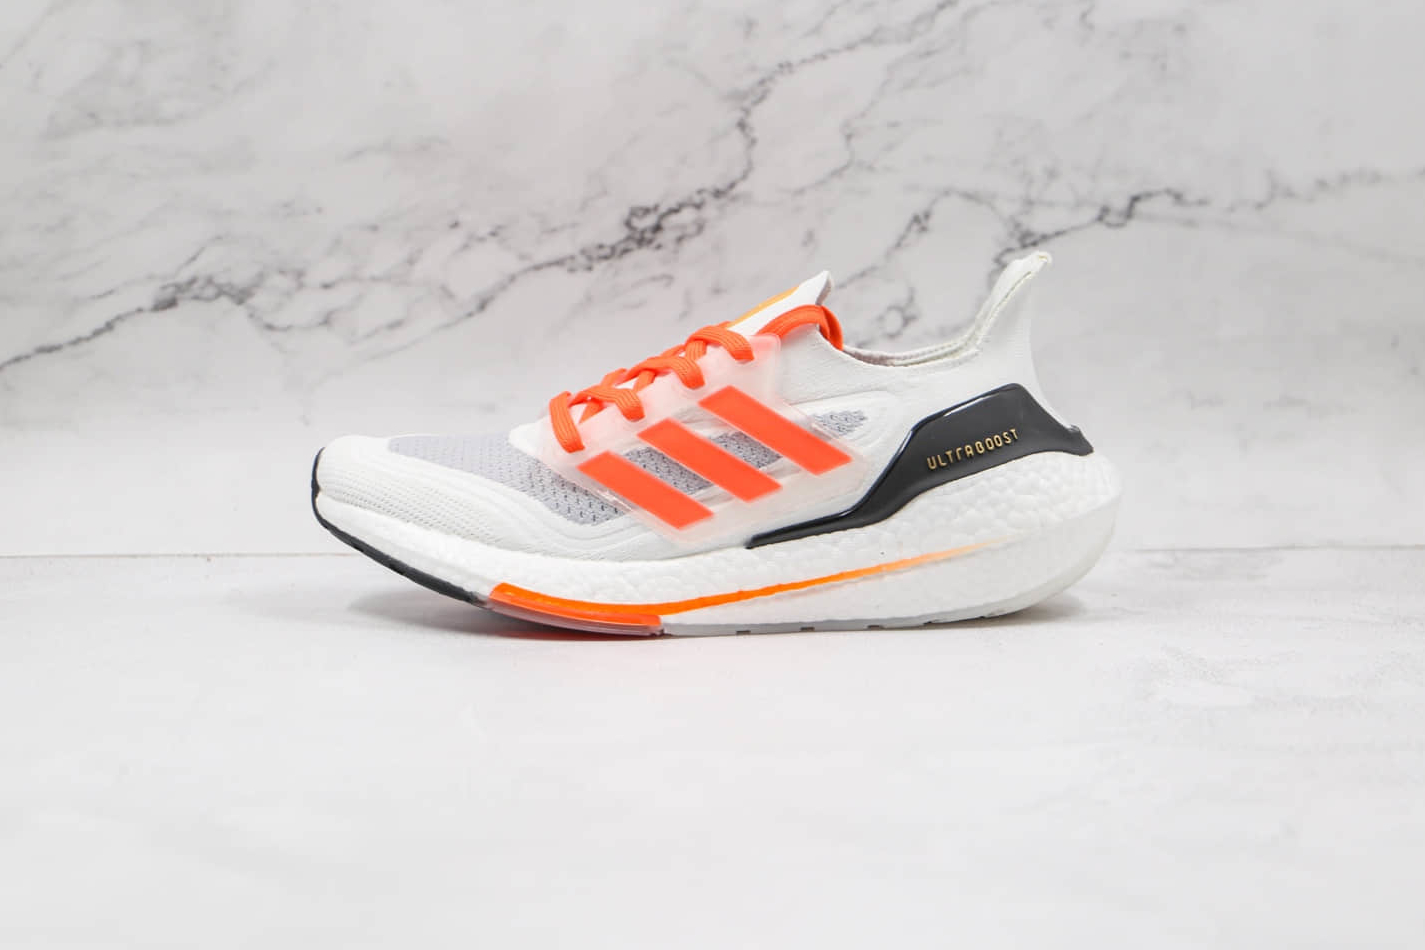 Adidas UltraBoost 21 'Grey Screaming Orange' FY0375 - Stylish and Performance-Driven Running Shoes